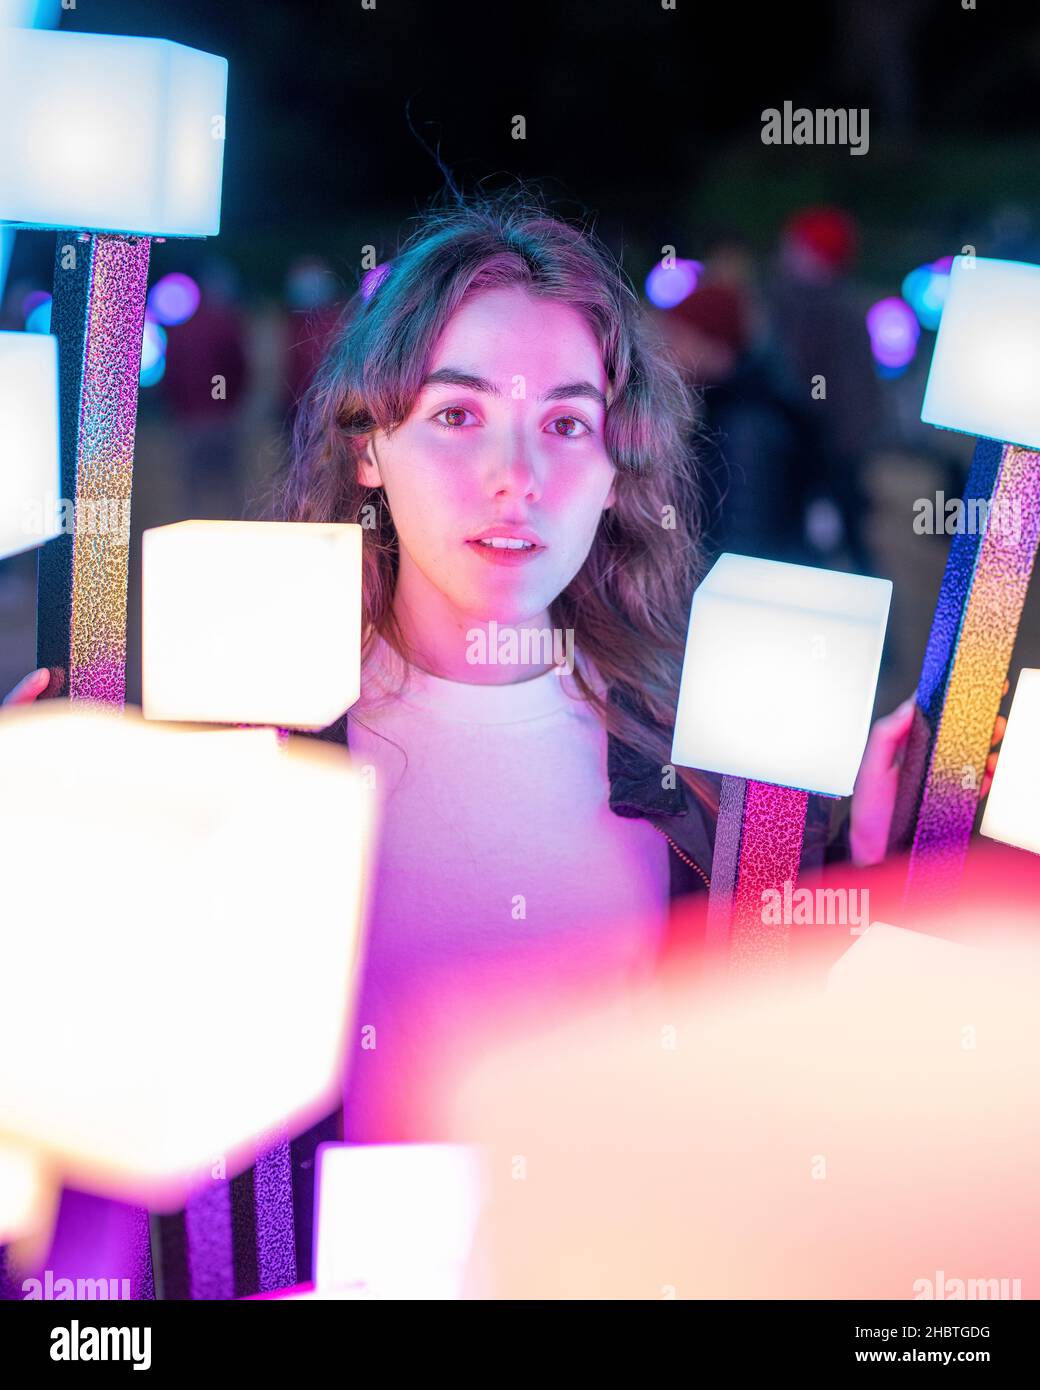 Teenage Woman Surrounded by Artistic Holiday Lights Stock Photo